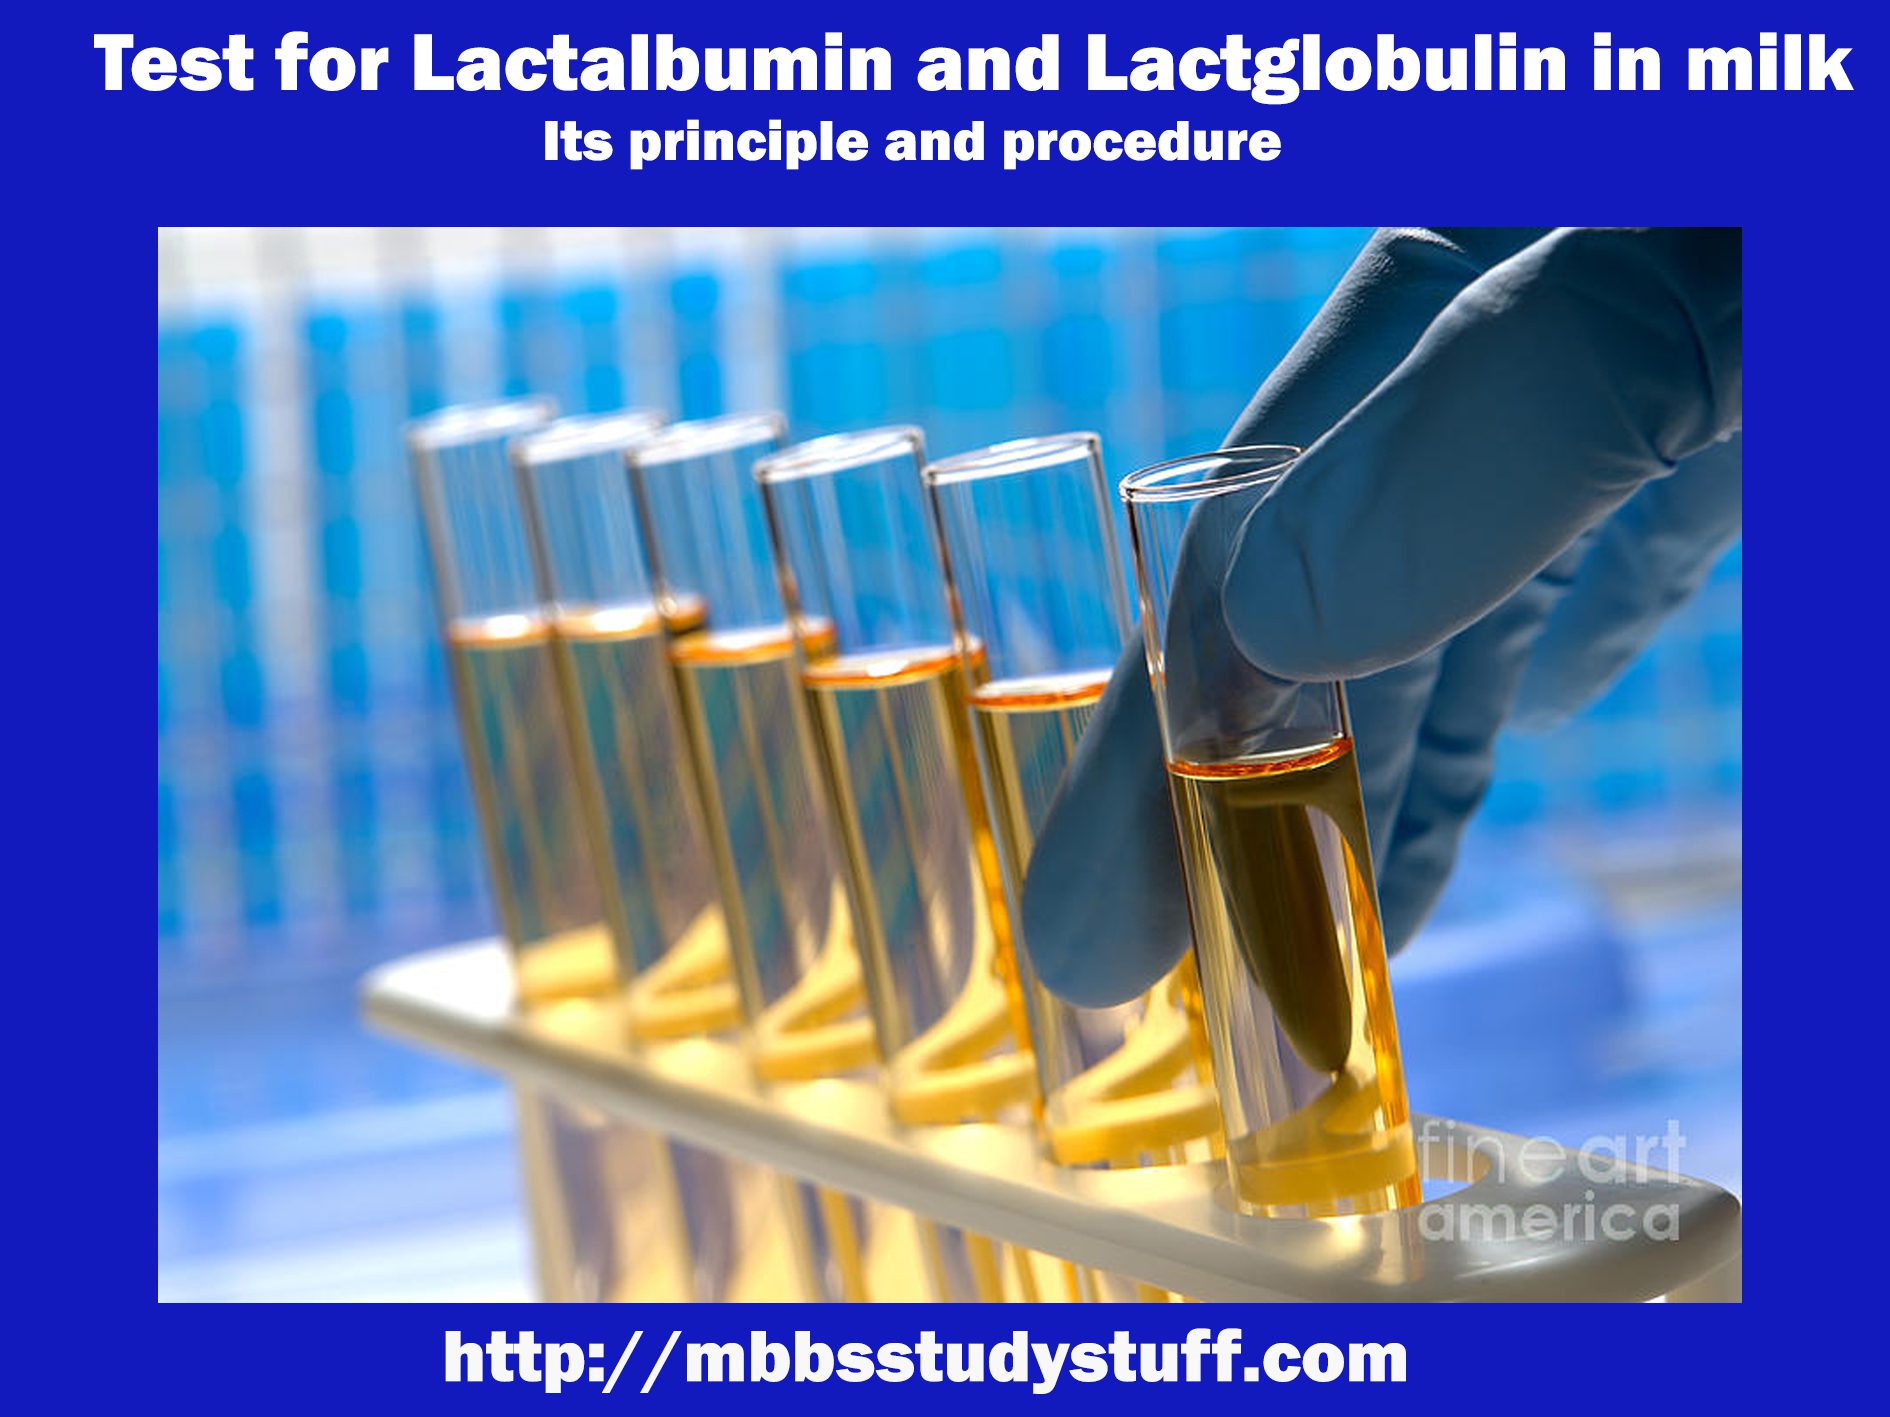 Test for Lactalbumin and Lactoglobulin in milk